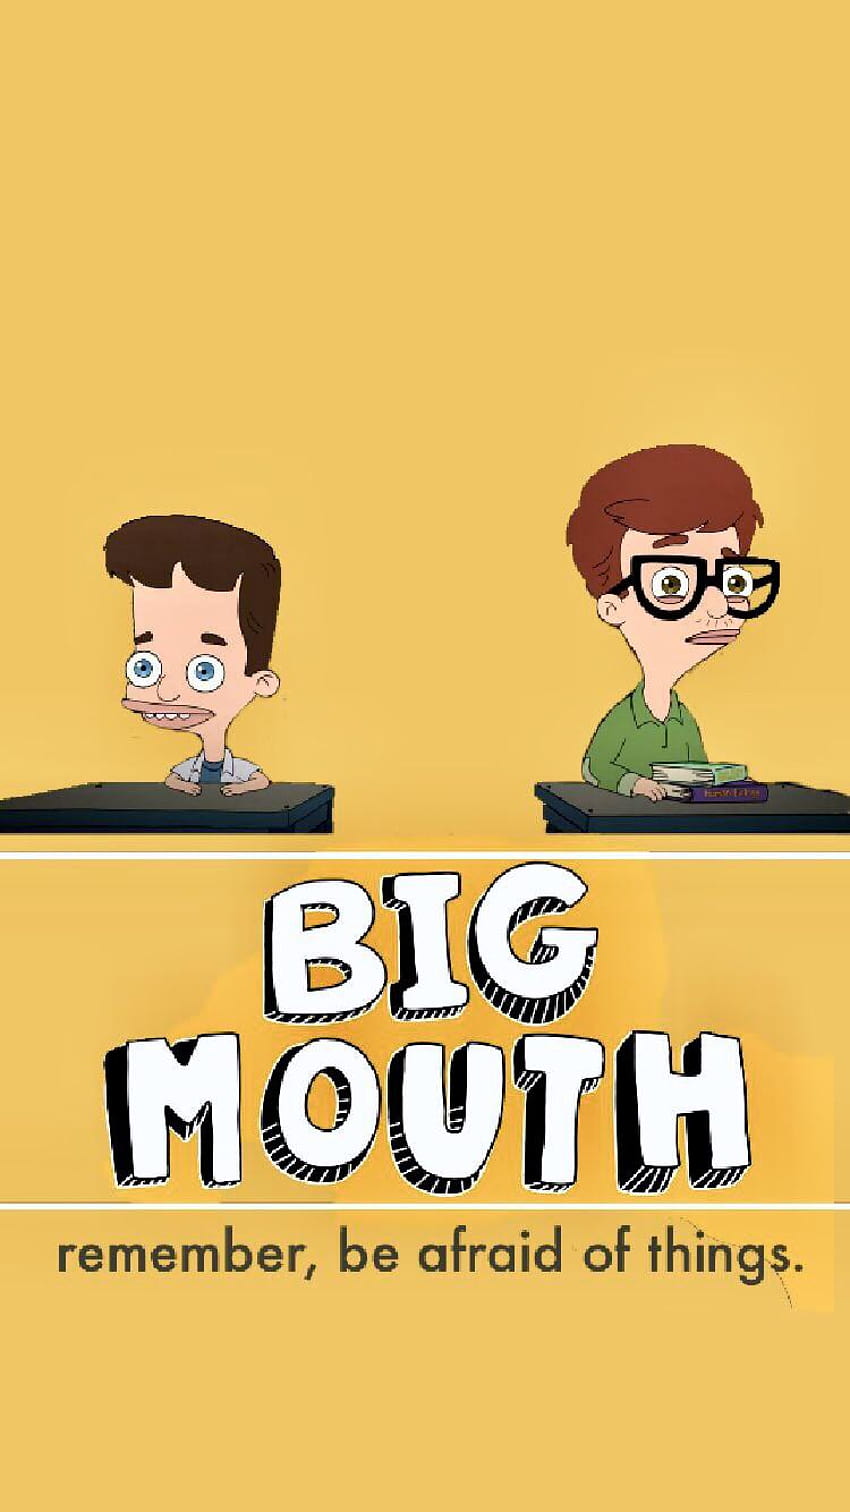 Big Mouth posted by Christopher Tremblay, big mouth cartoon HD phone wallpaper